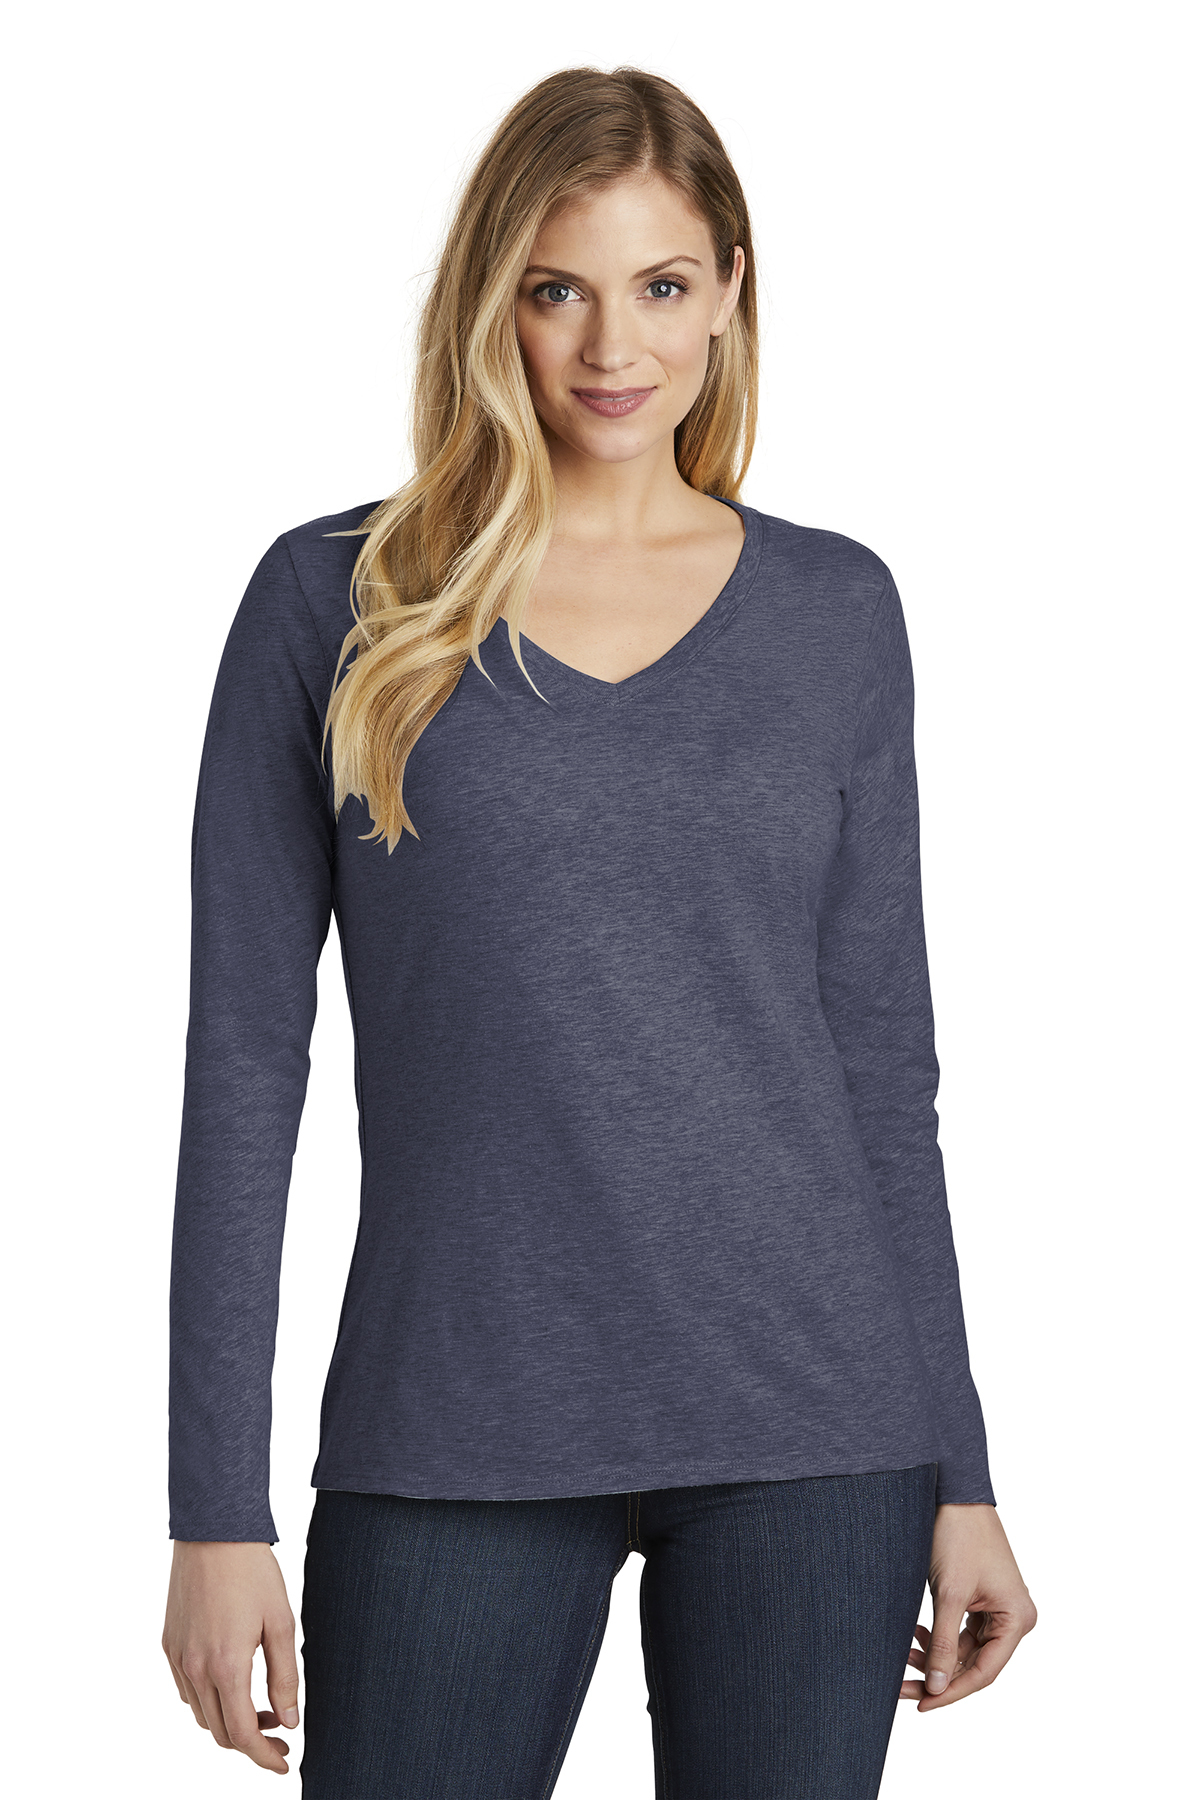 click to view Heathered Navy